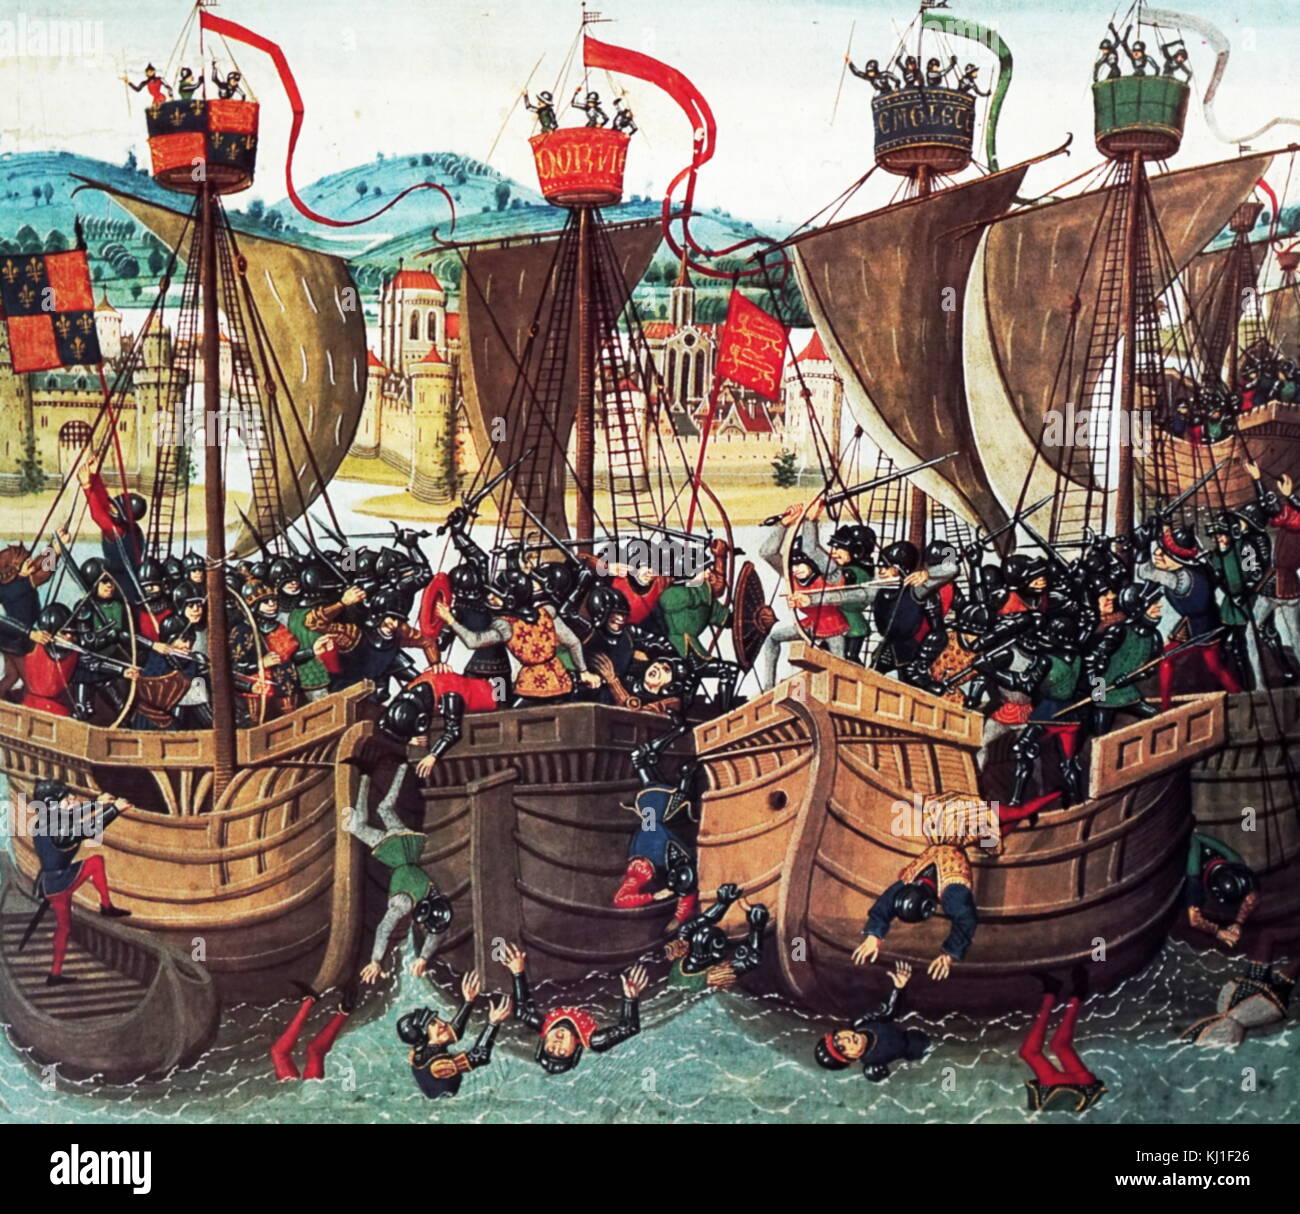 Battle of Sluys, also called Battle of l'Ecluse, sea battle; 24 June 1340. one of the opening conflicts of the Hundred Years' War between England and France. miniature of the battle from Jean Froissart's Chronicles, 15th century Stock Photo